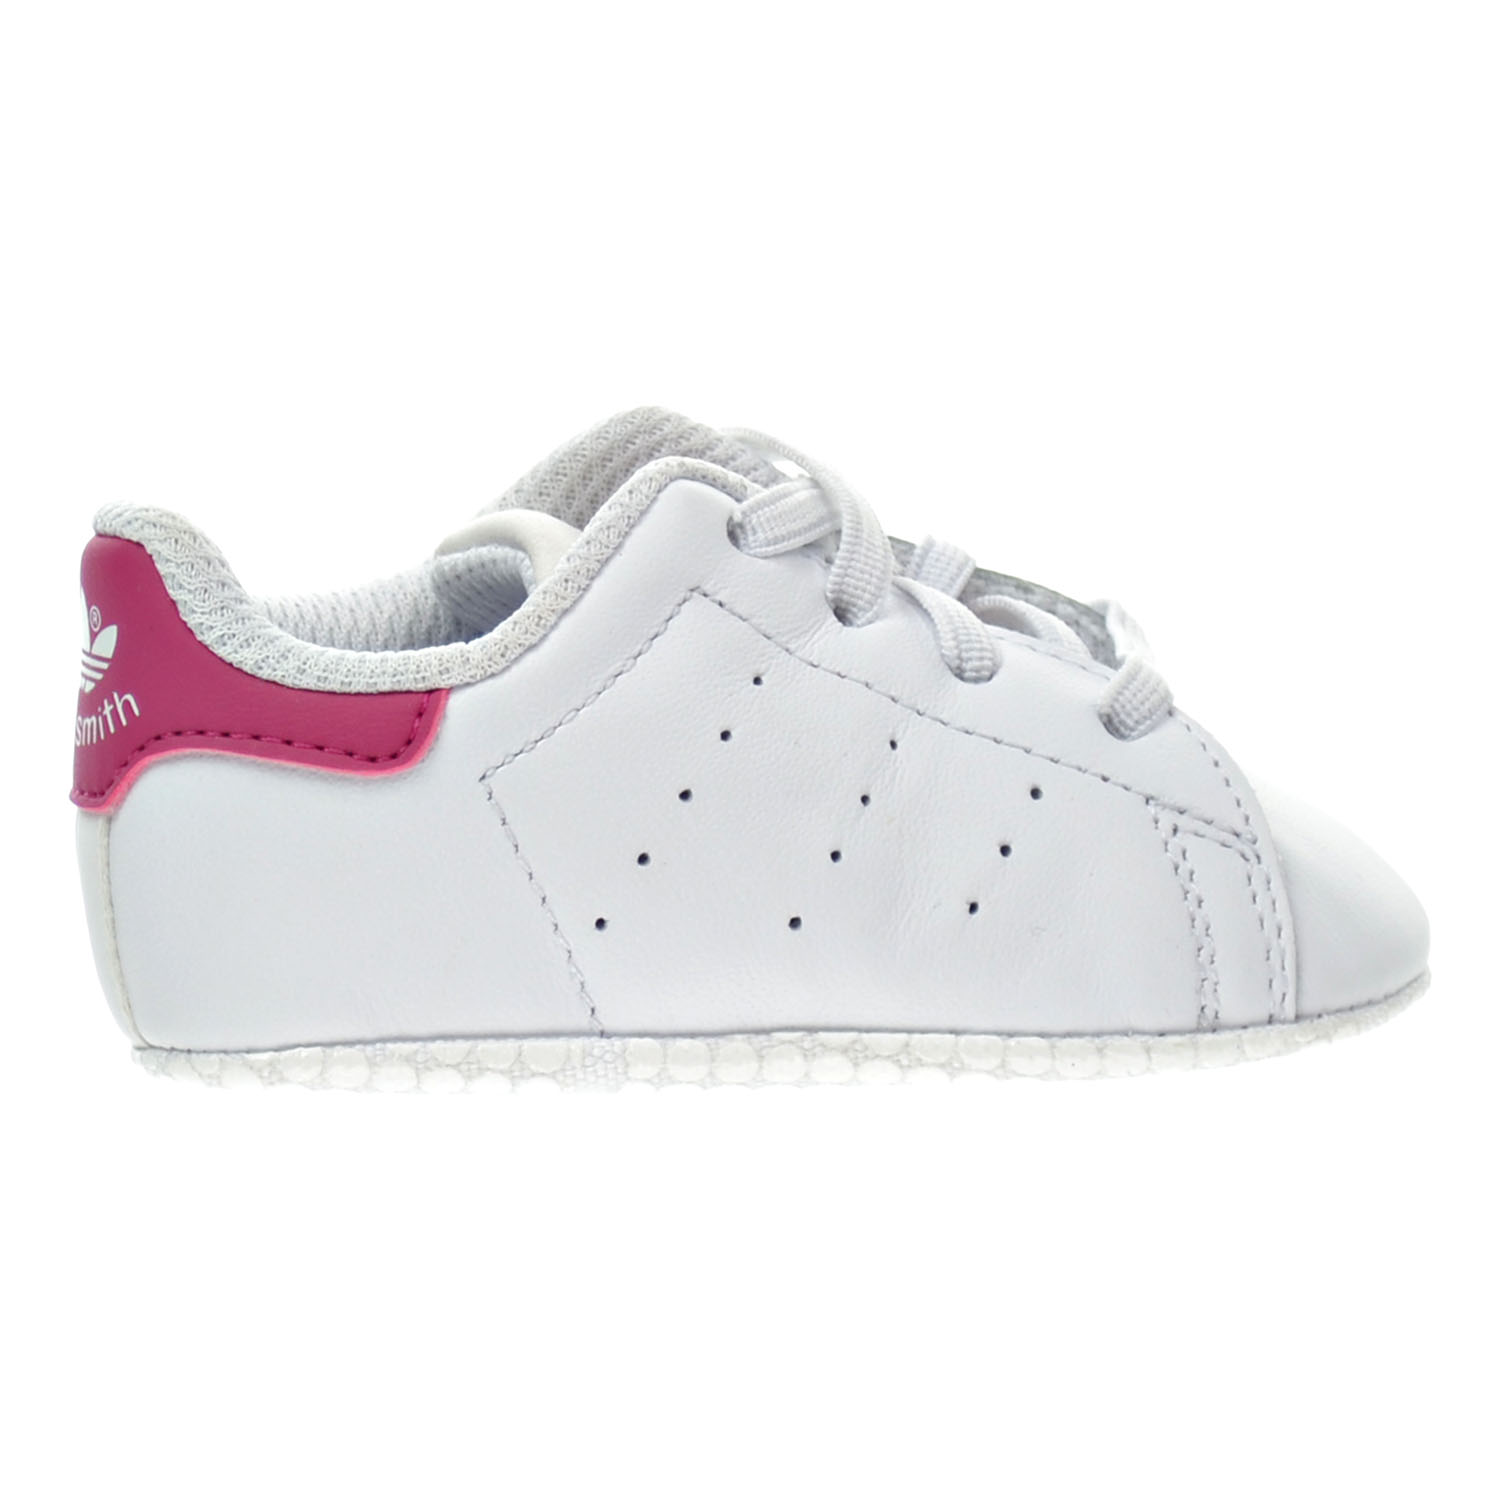 stan smith bold pink